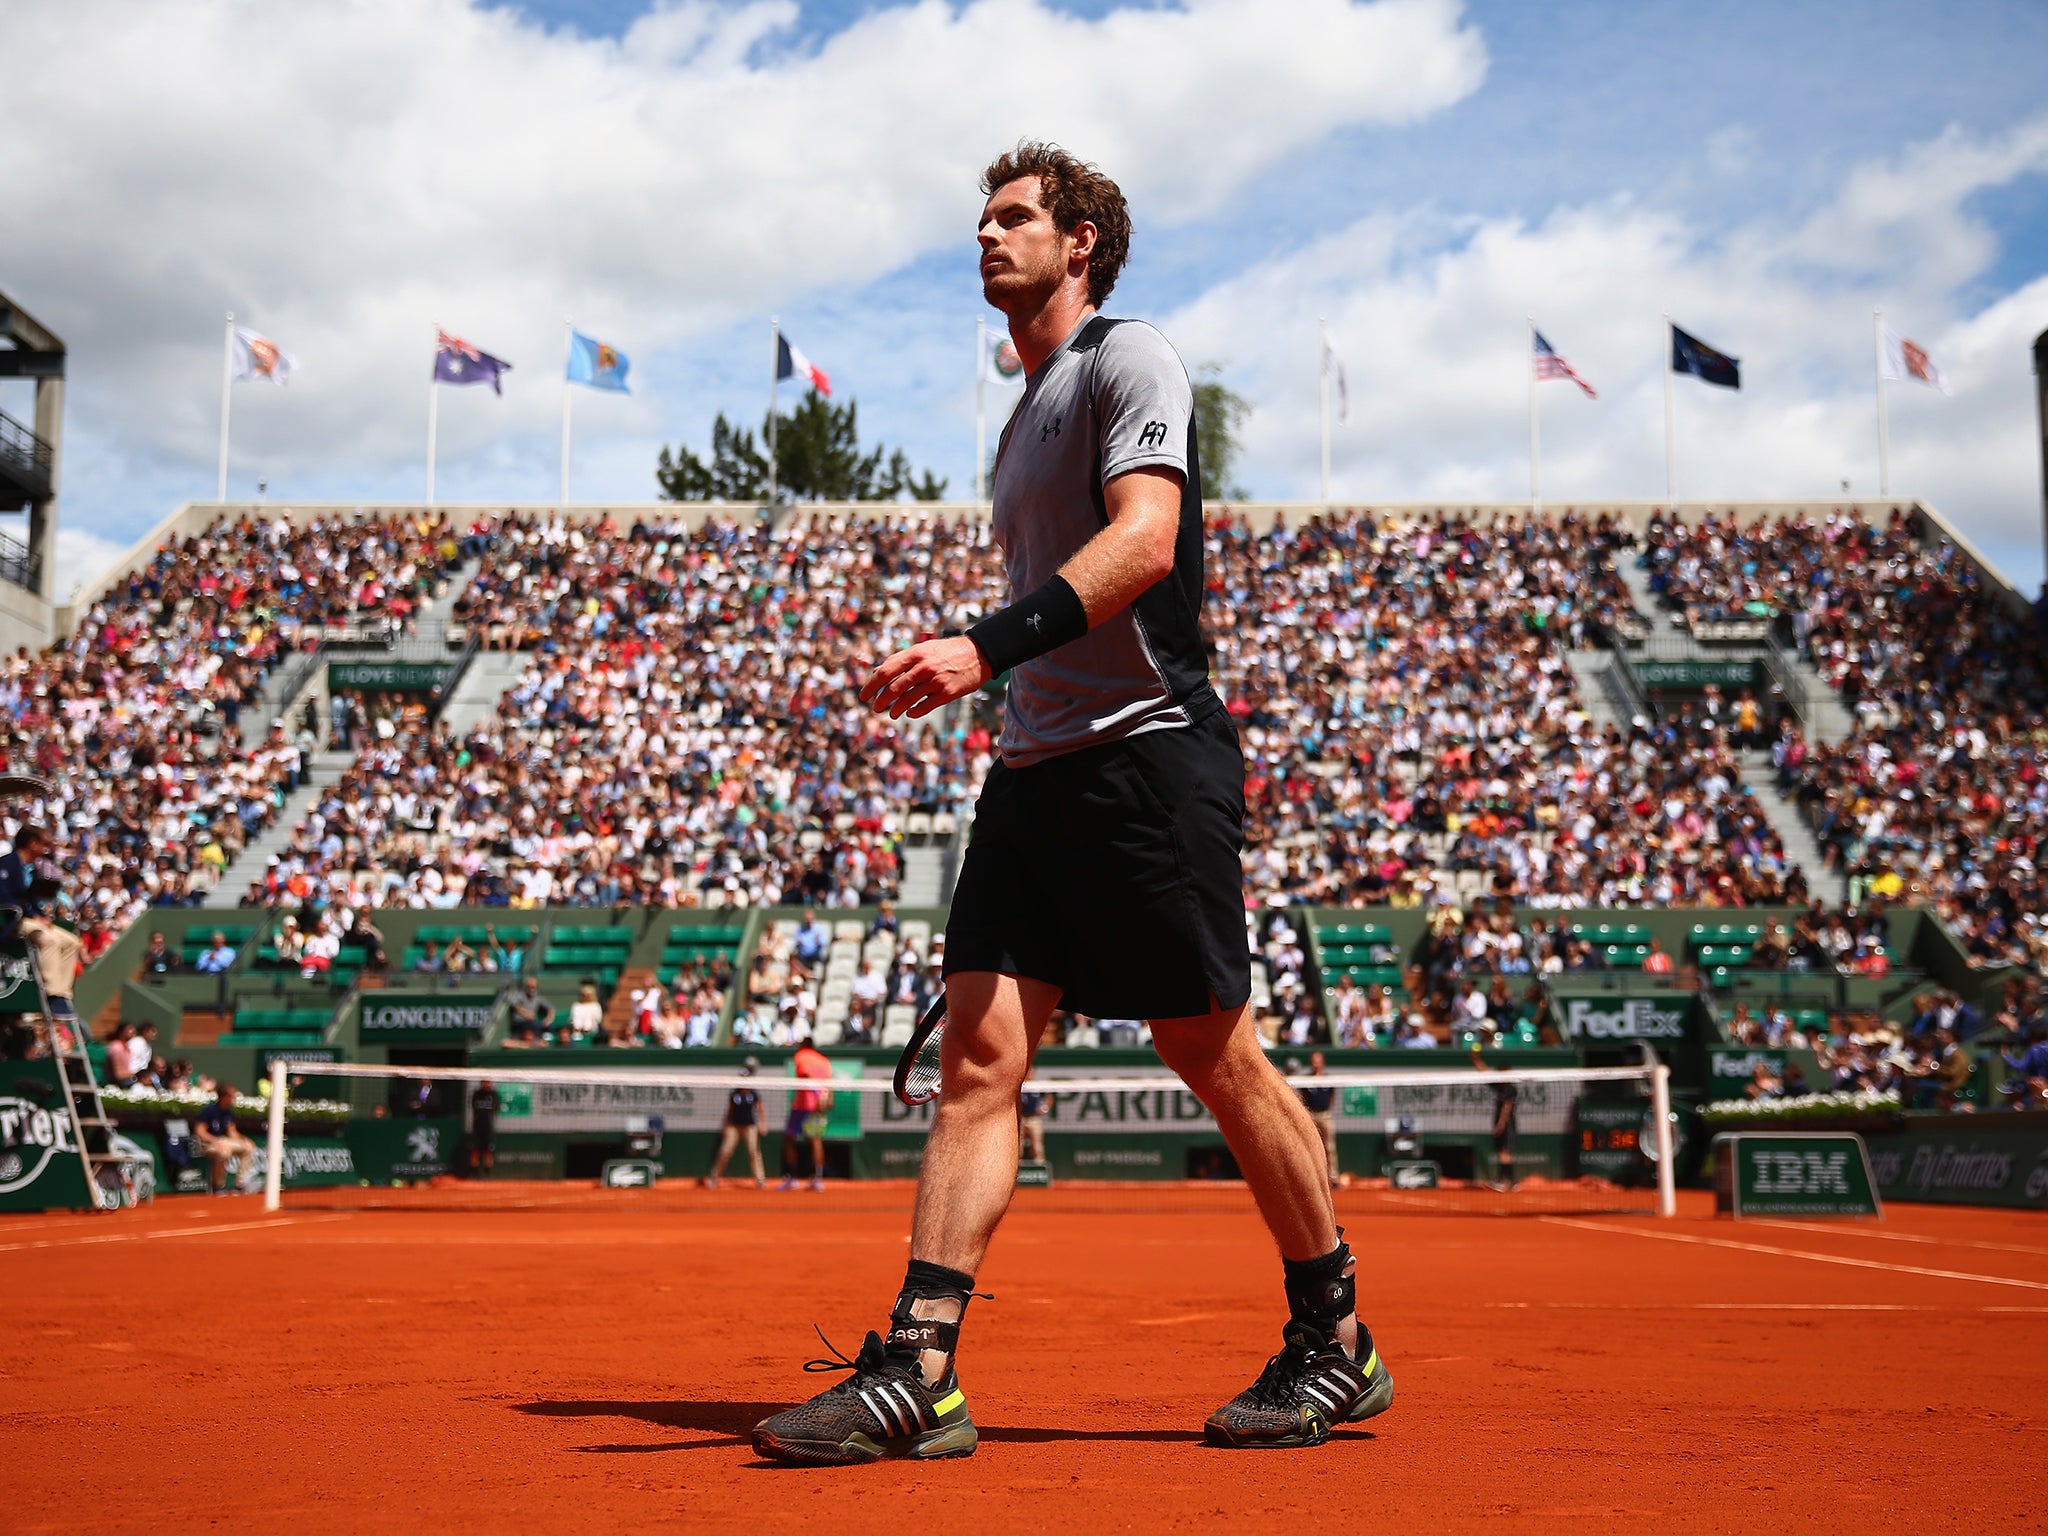 Andy Murray has reached the last-16 at the French Open for the sixth straight time